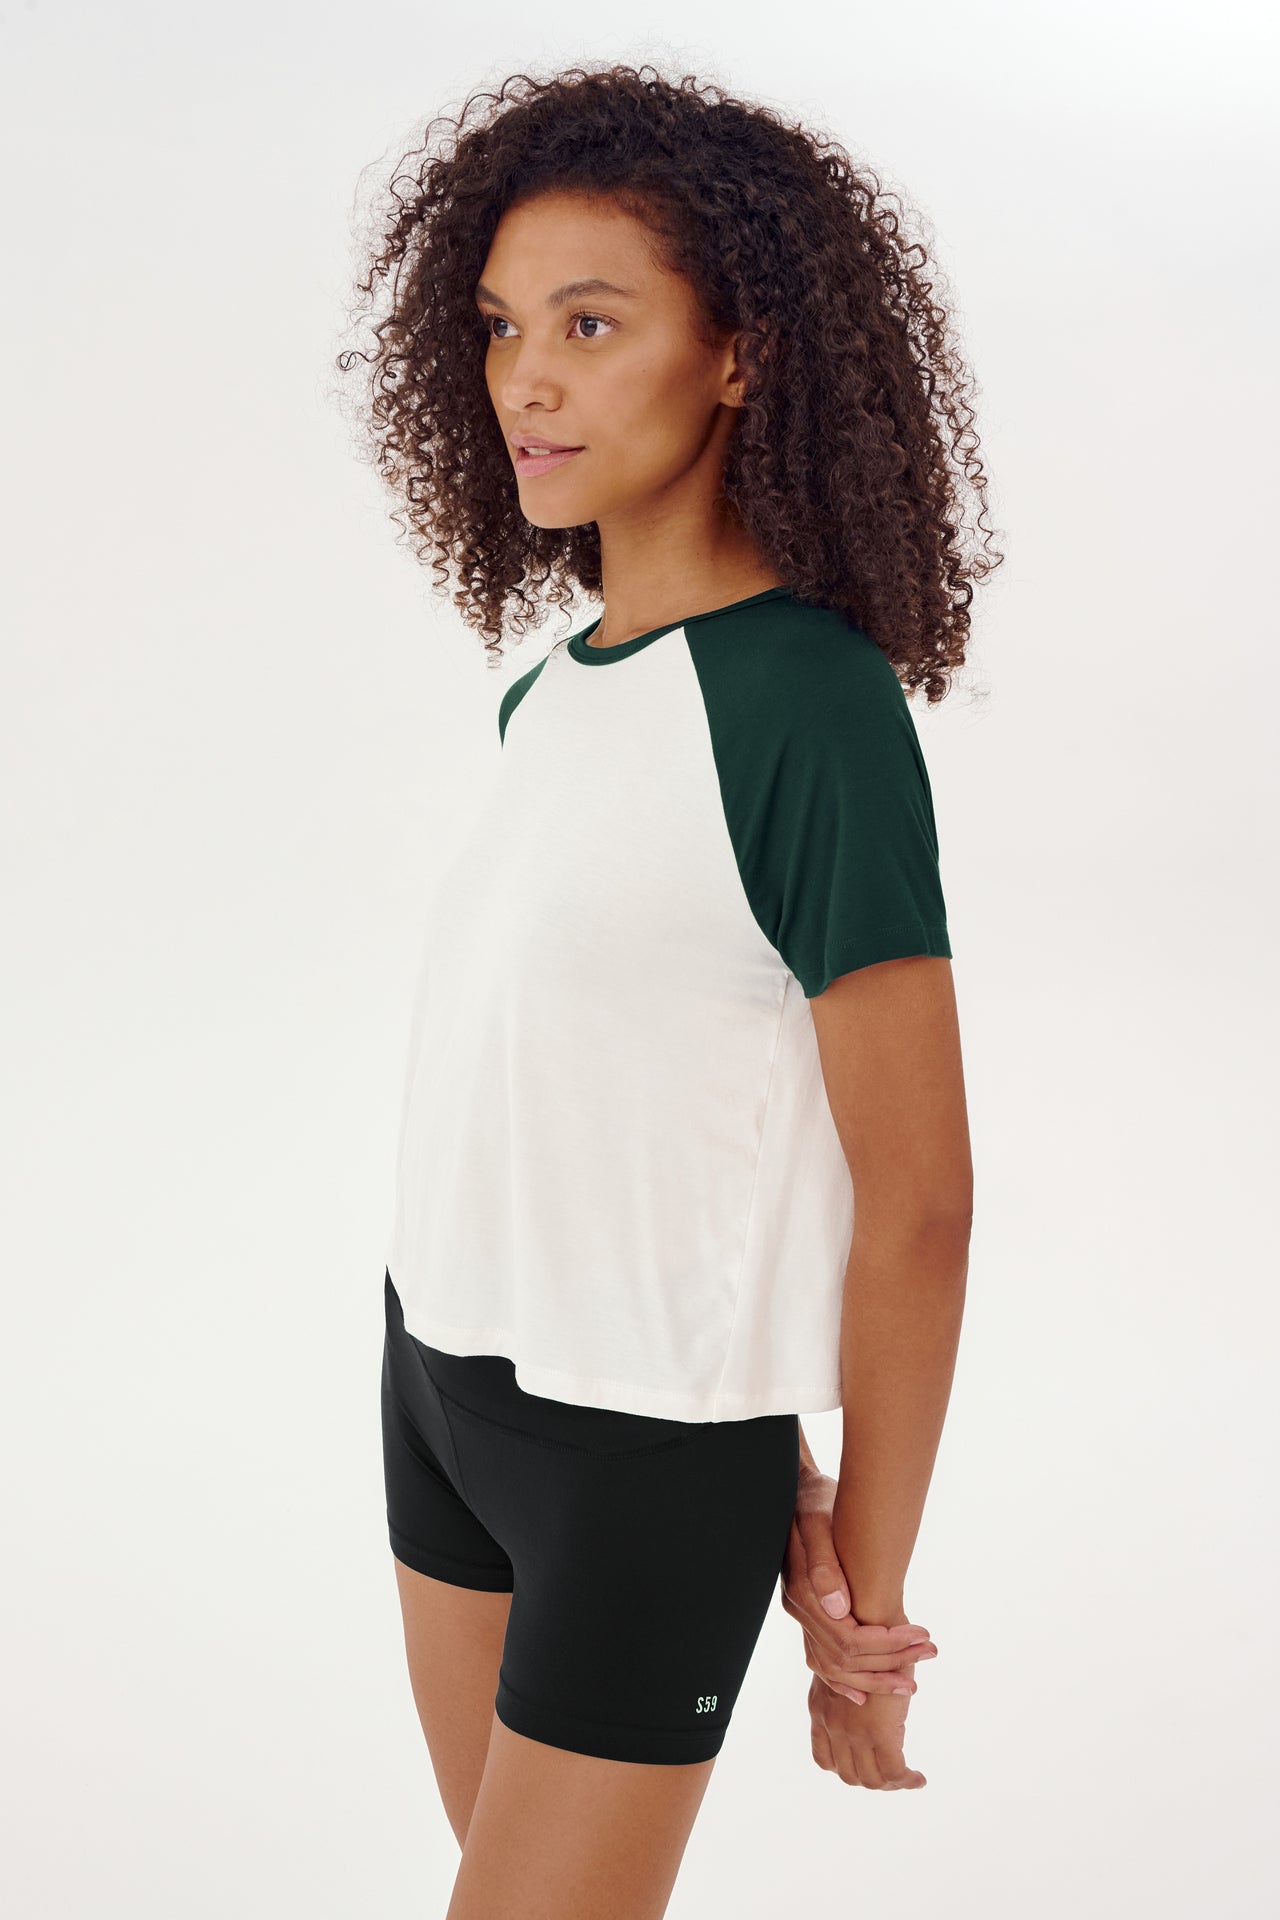 A woman wearing a SPLITS59 white and green Baseball Jersey Tee - White/Forest.